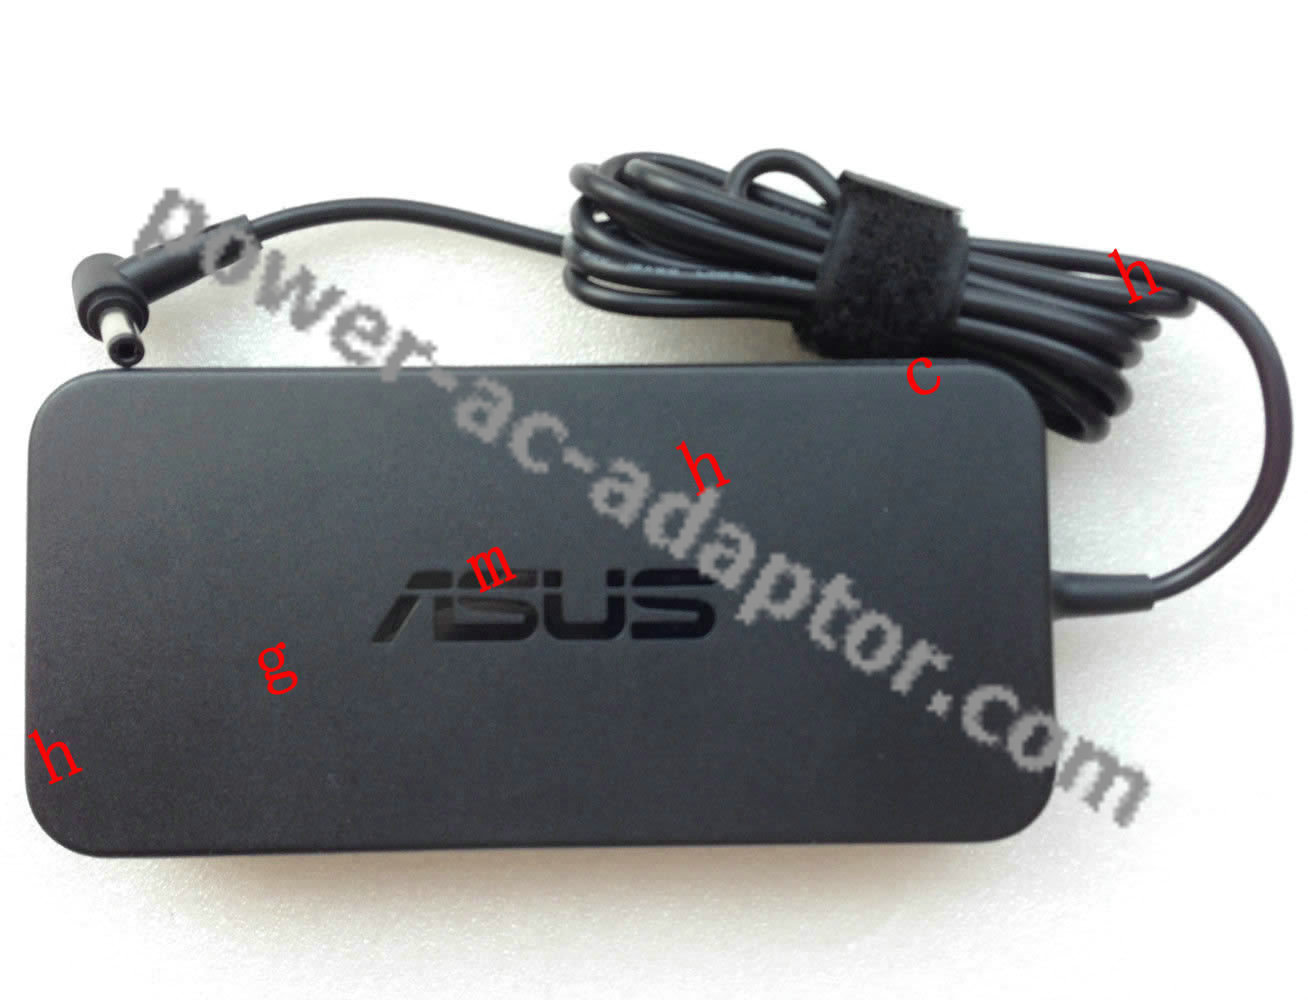 Asus 120W G51J 3D NVIDIA GeForce GTX 260M Slim AC Adapter for